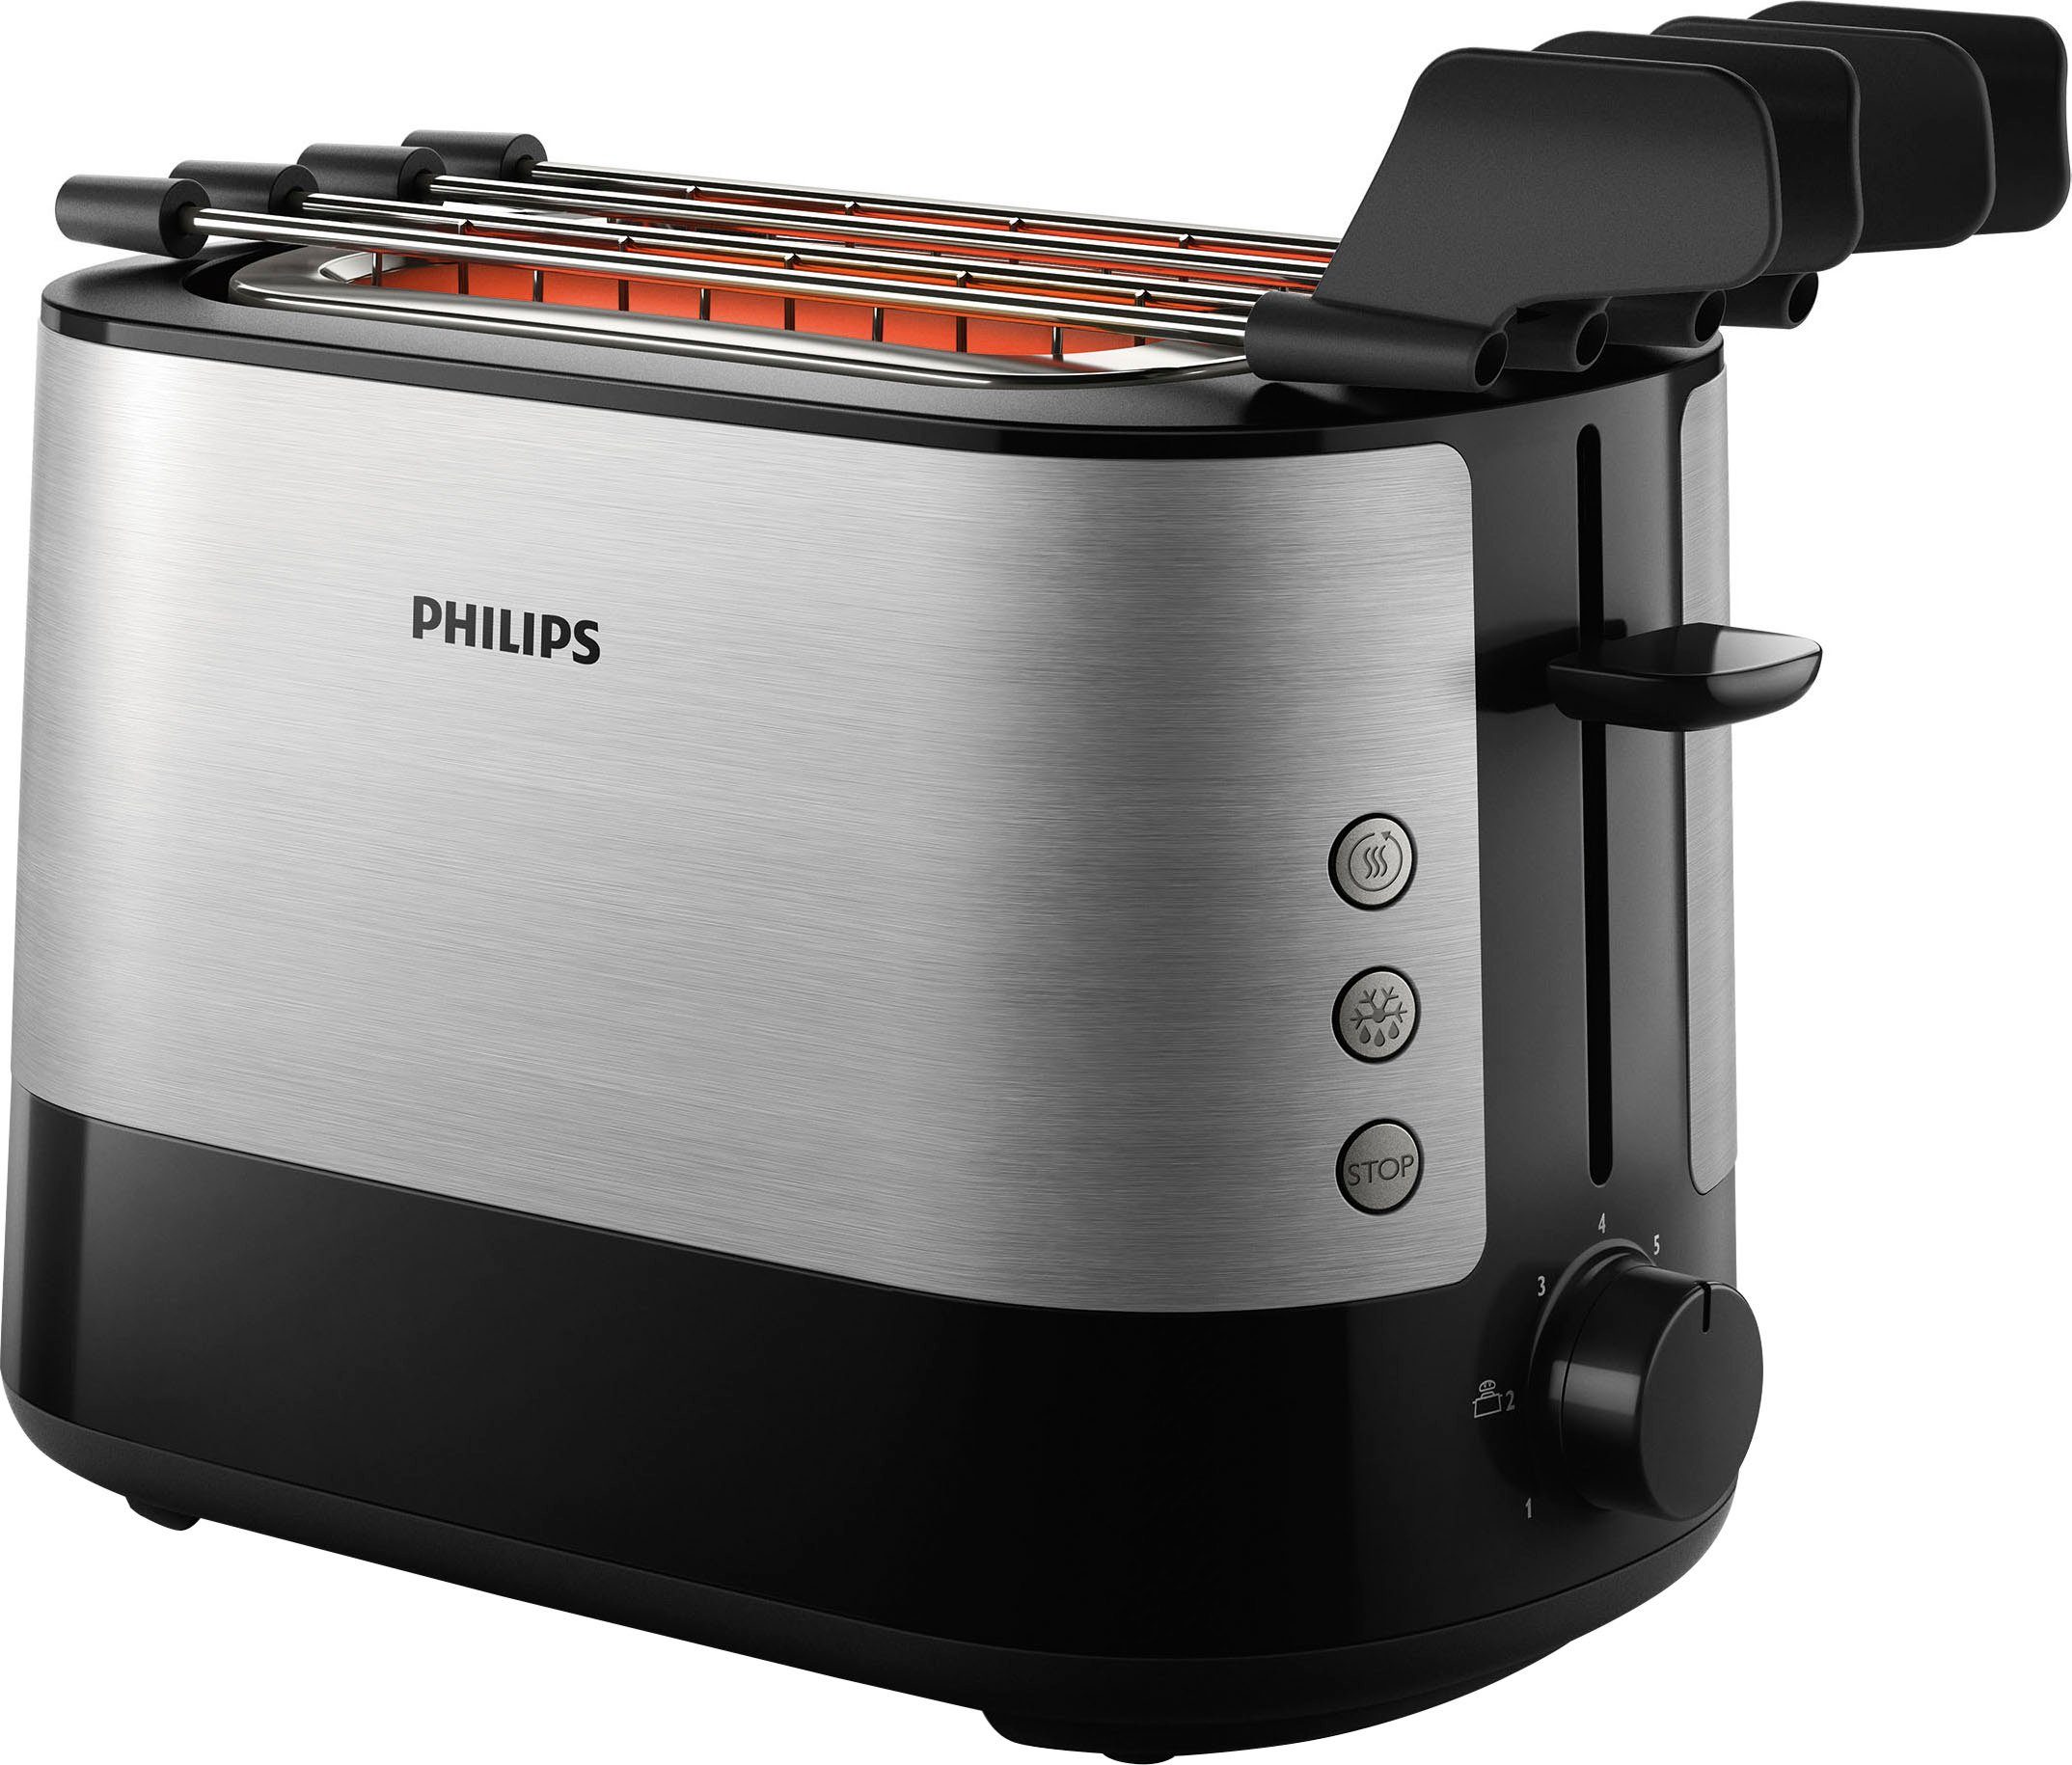 Philips HD2639/90, W 730 Toaster